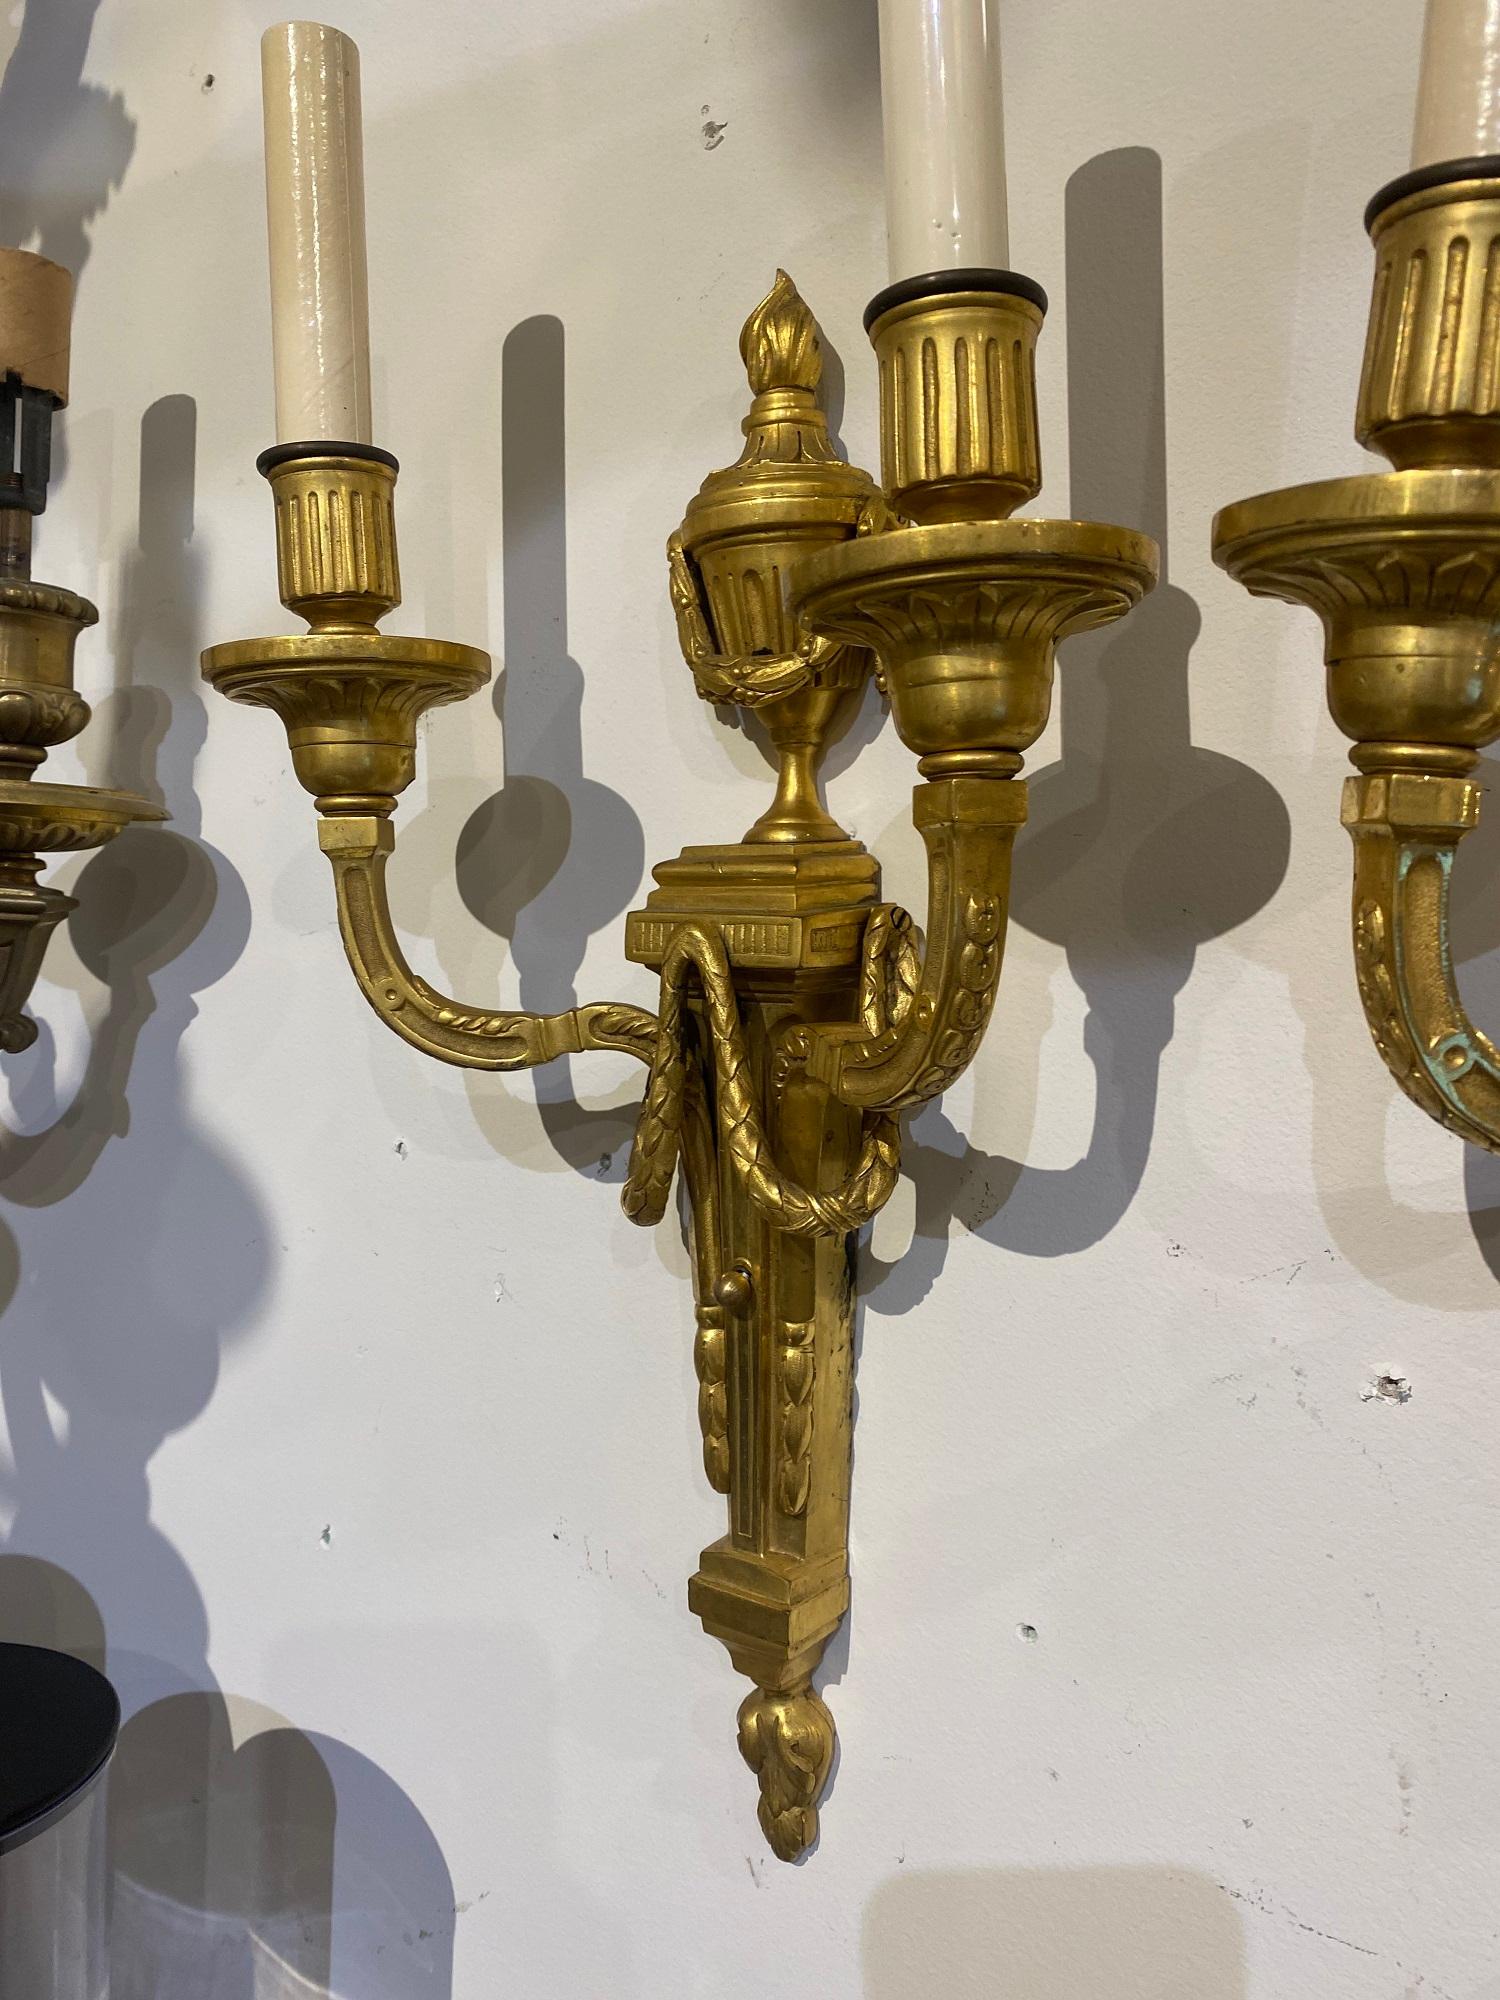 Pair of circa 1900’s Caldwell gilt bronze sconces with two lights. Original finish and patina